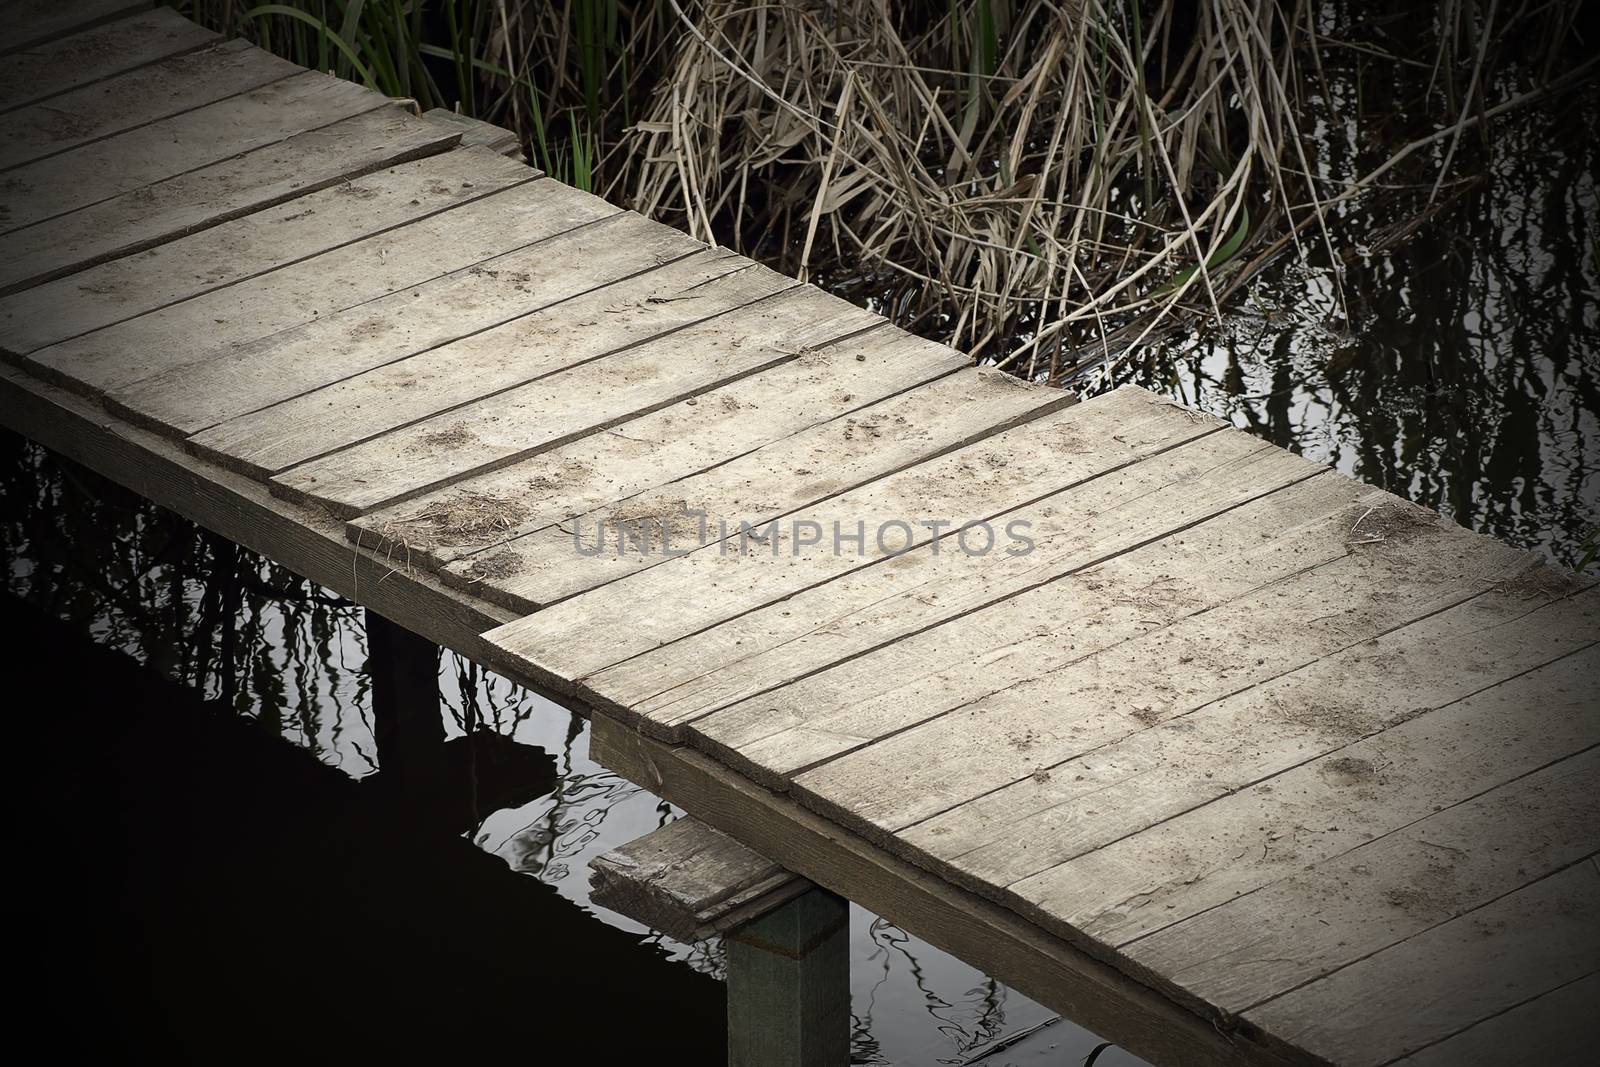 abstract view of a footbridge by taviphoto